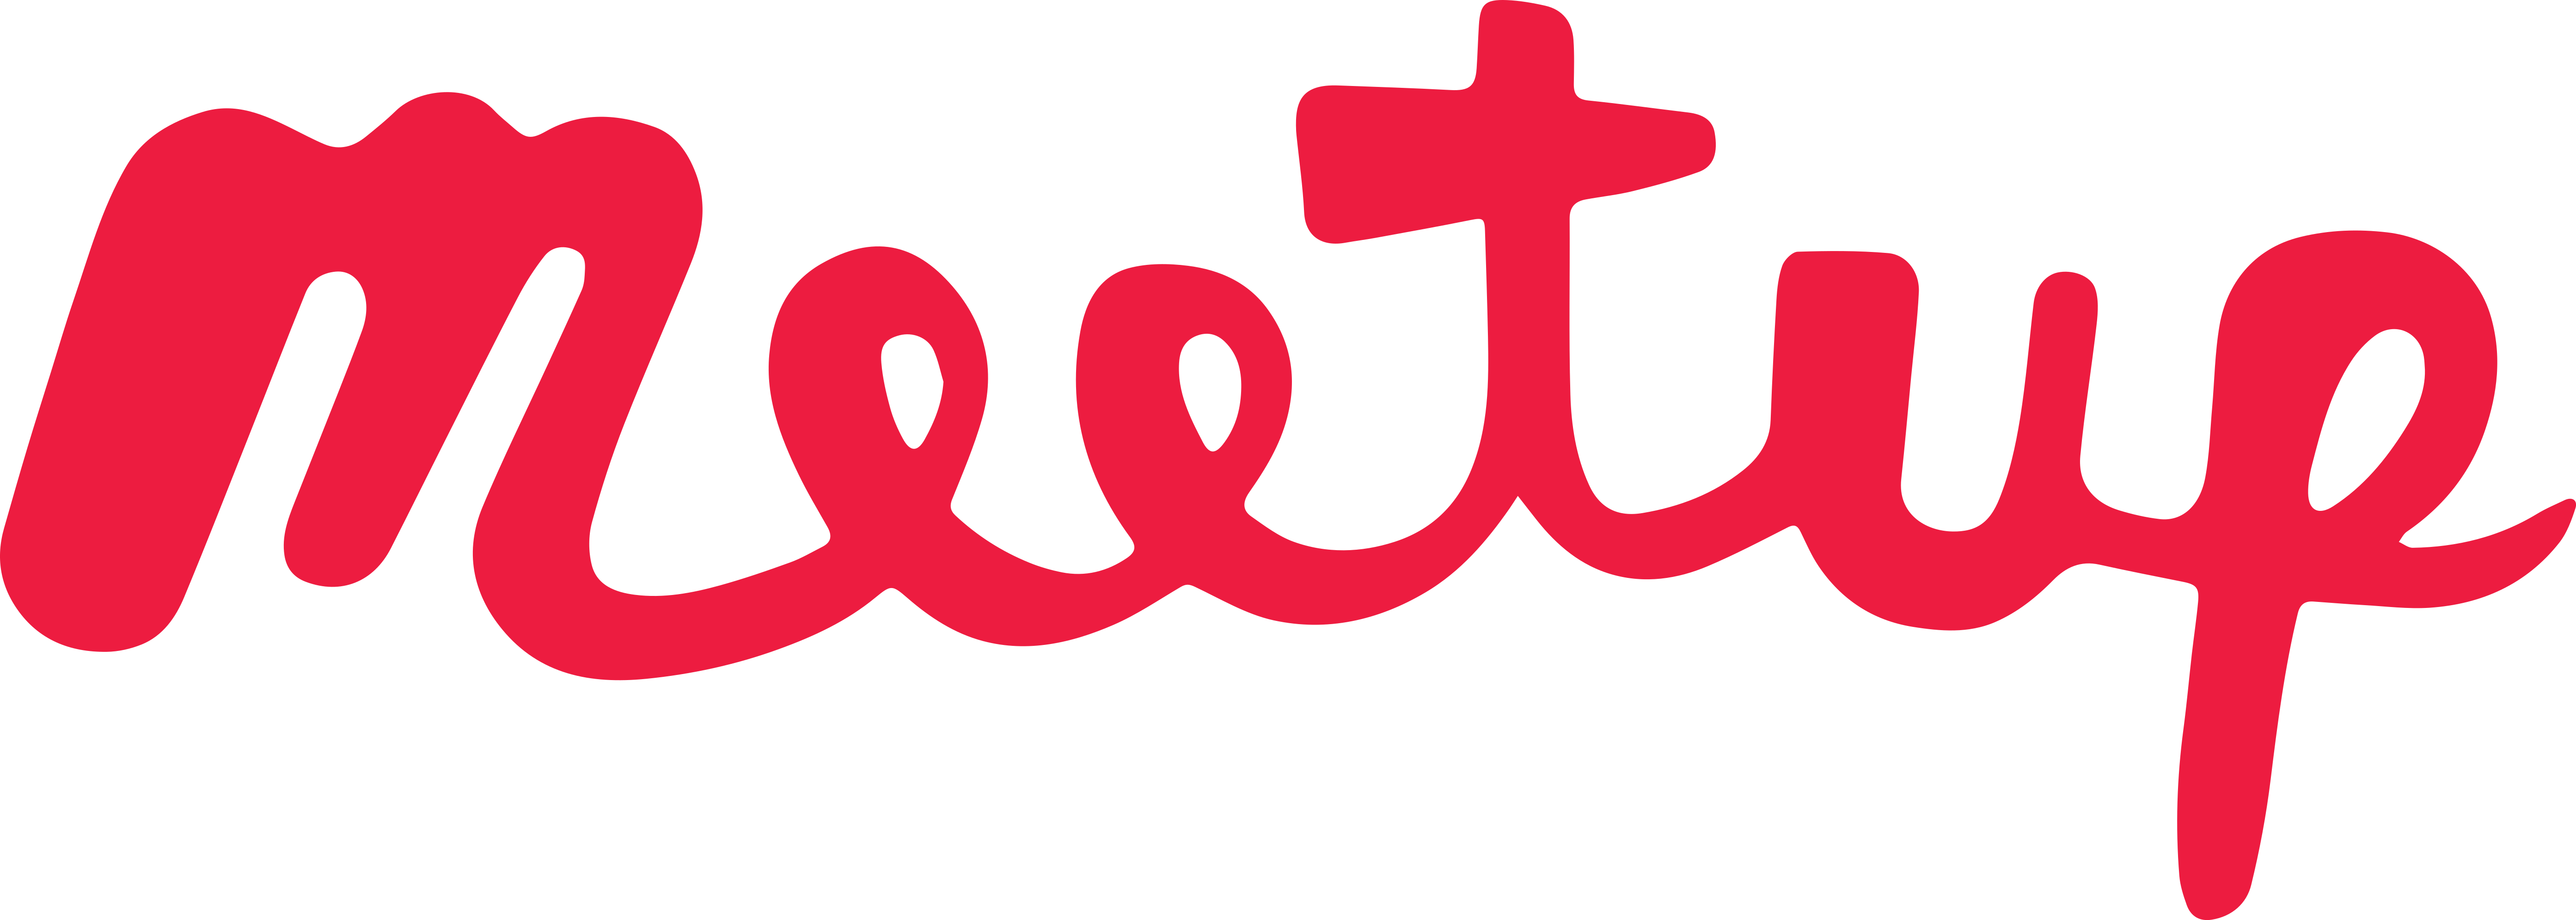 If You Have Questions, Please Let Us Know - Meetup Logo (5573x1990)